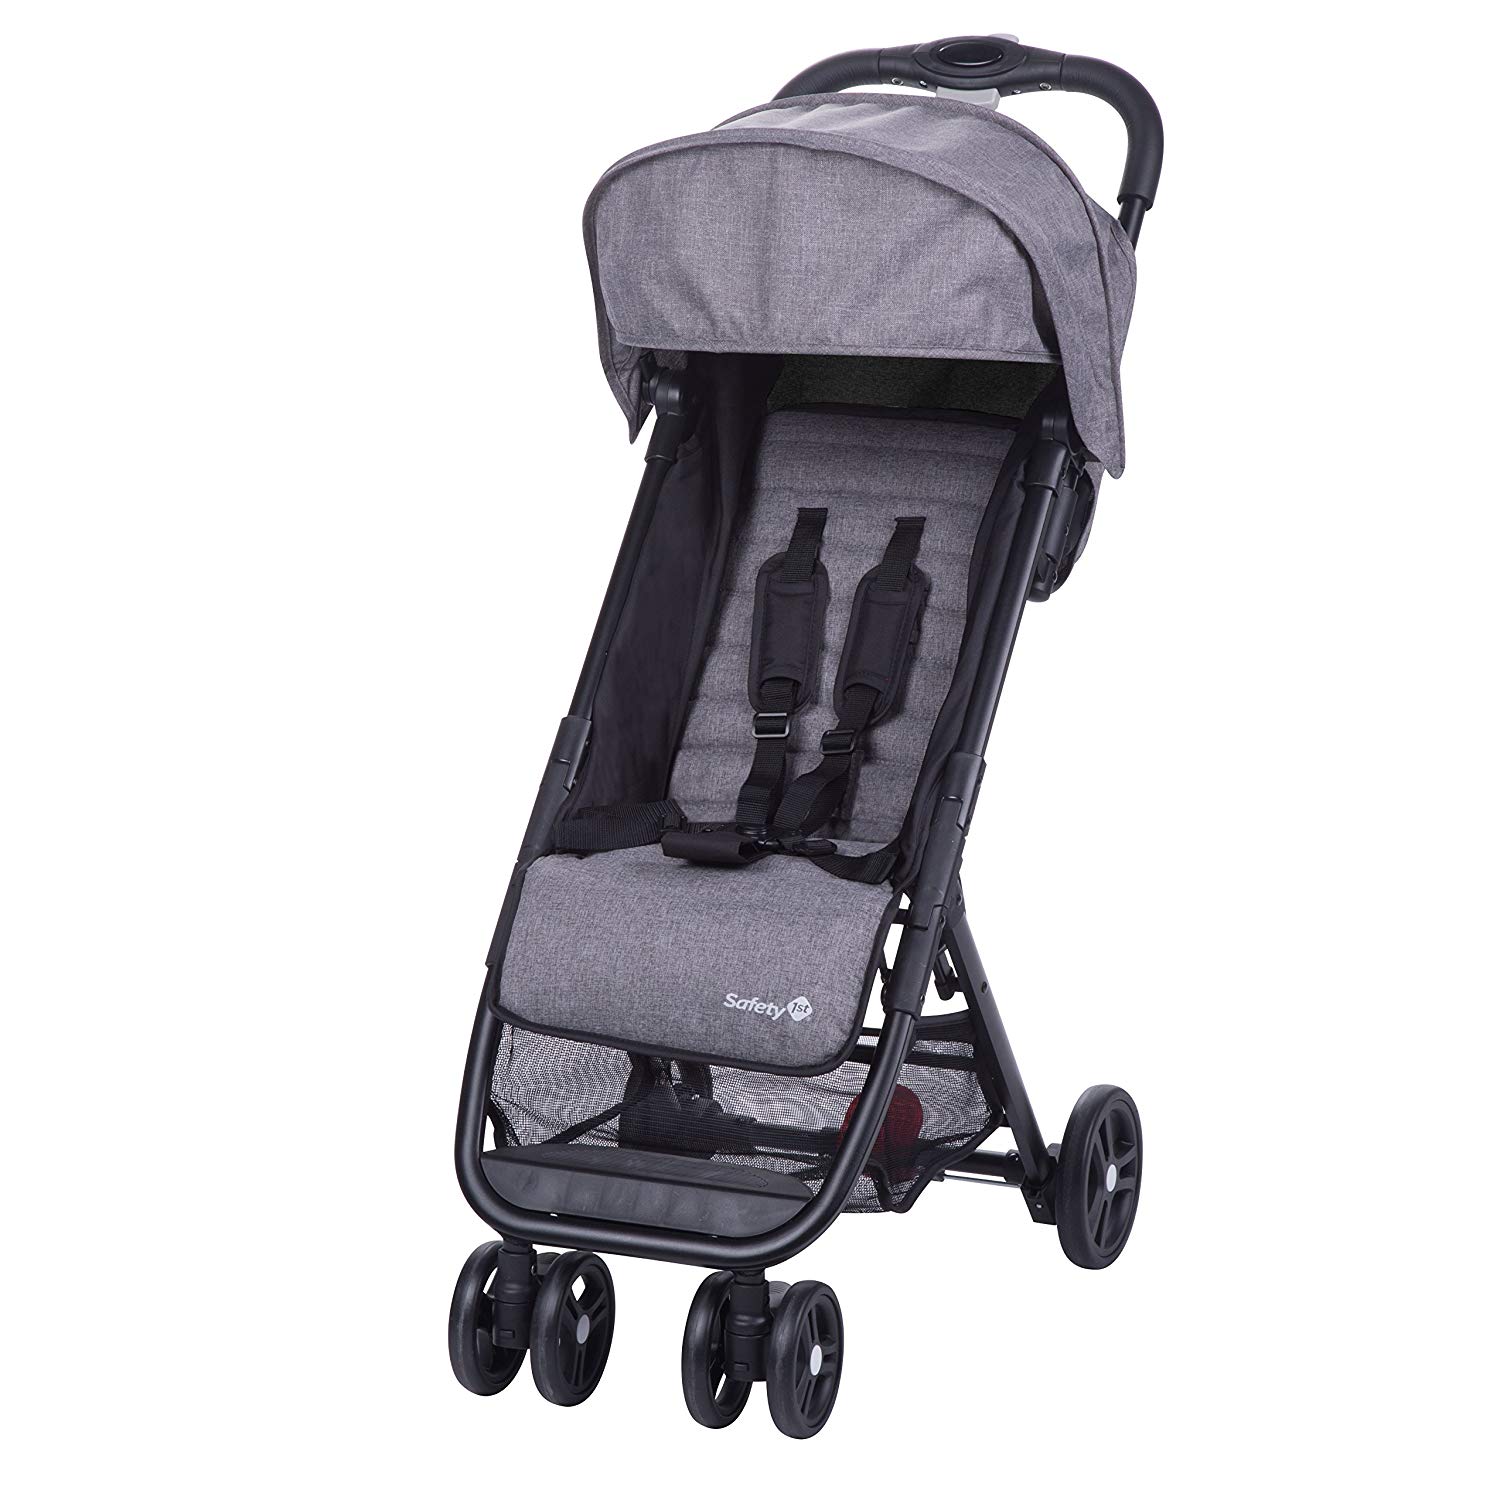 Safety 1st Teeny Buggy Ultra Compact Folding Pushchair Includes Matching Carry Bag, Ideal for Travel or the City, Can be Used from Approx. 6 Months to Approx. 3 Years, Black Chic (Black)